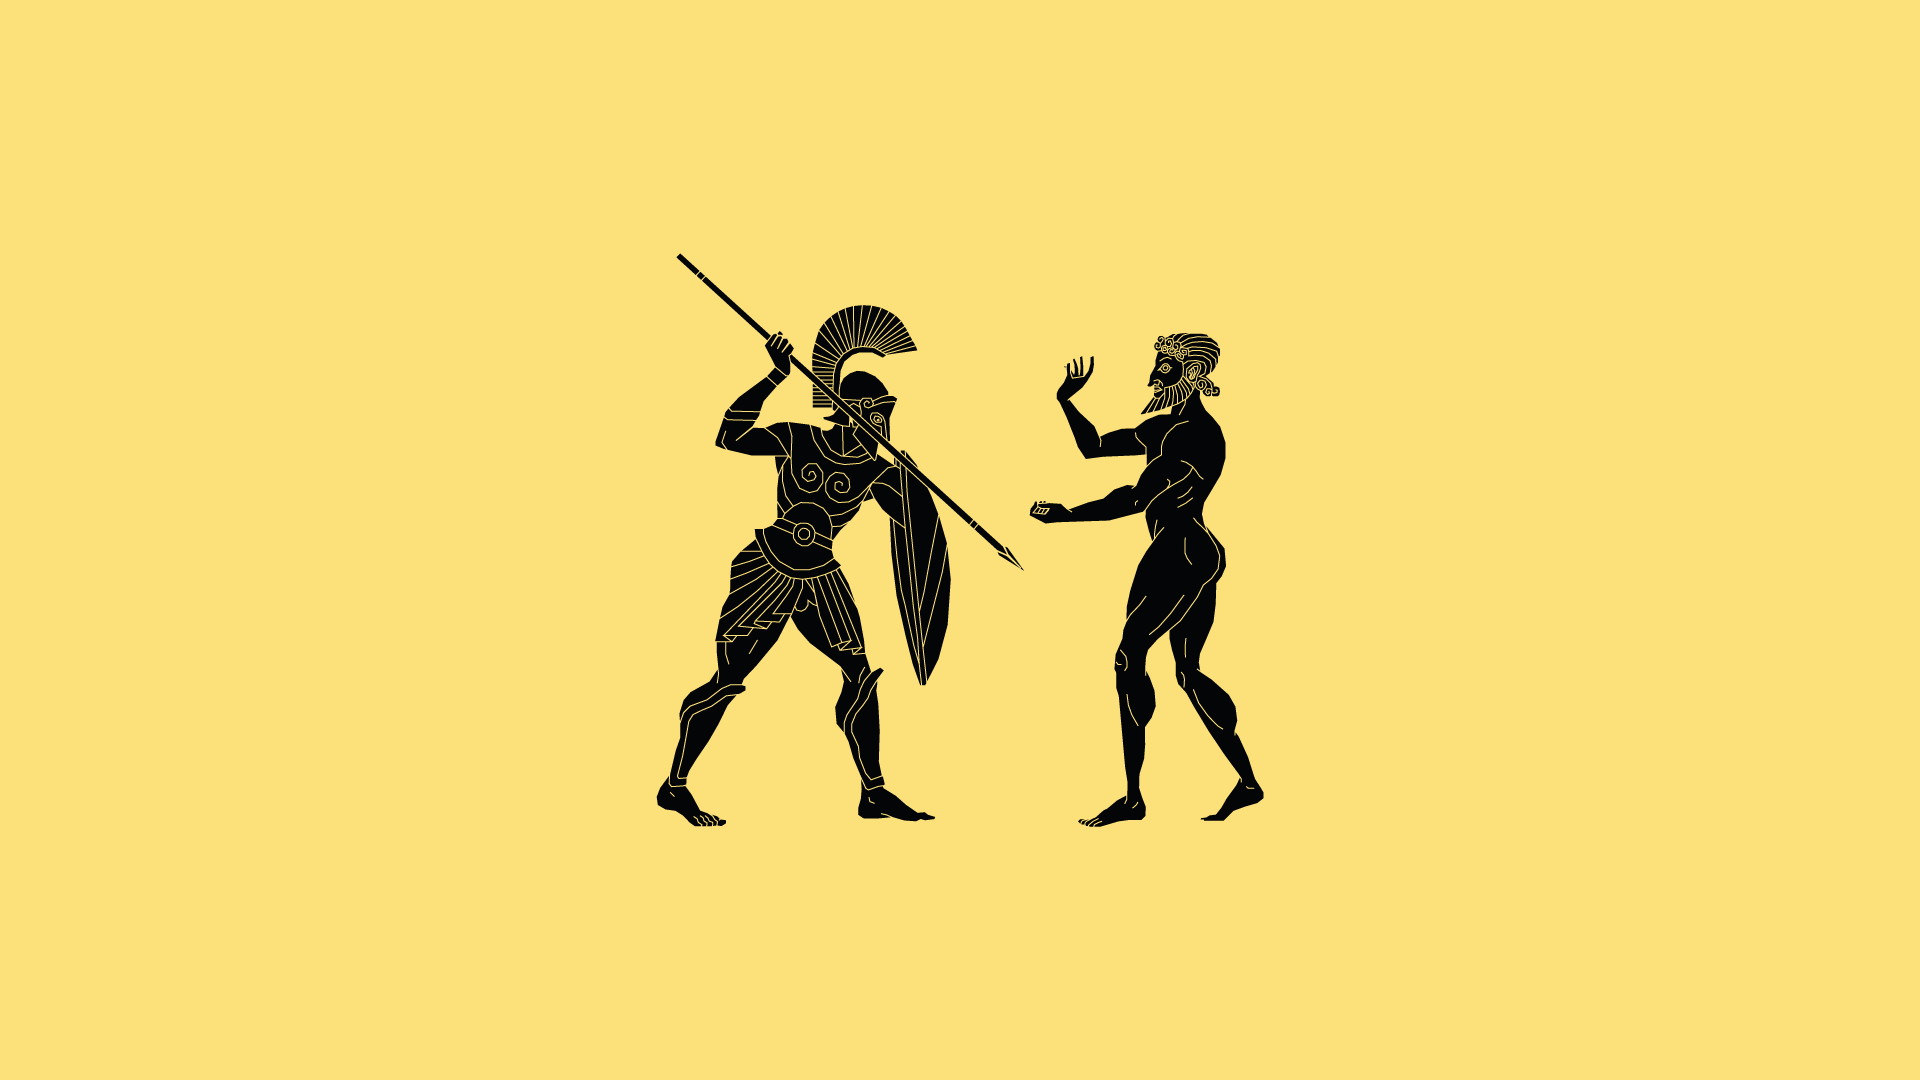 Vectorised illustration in the style of ancient Greek red-figure pottery